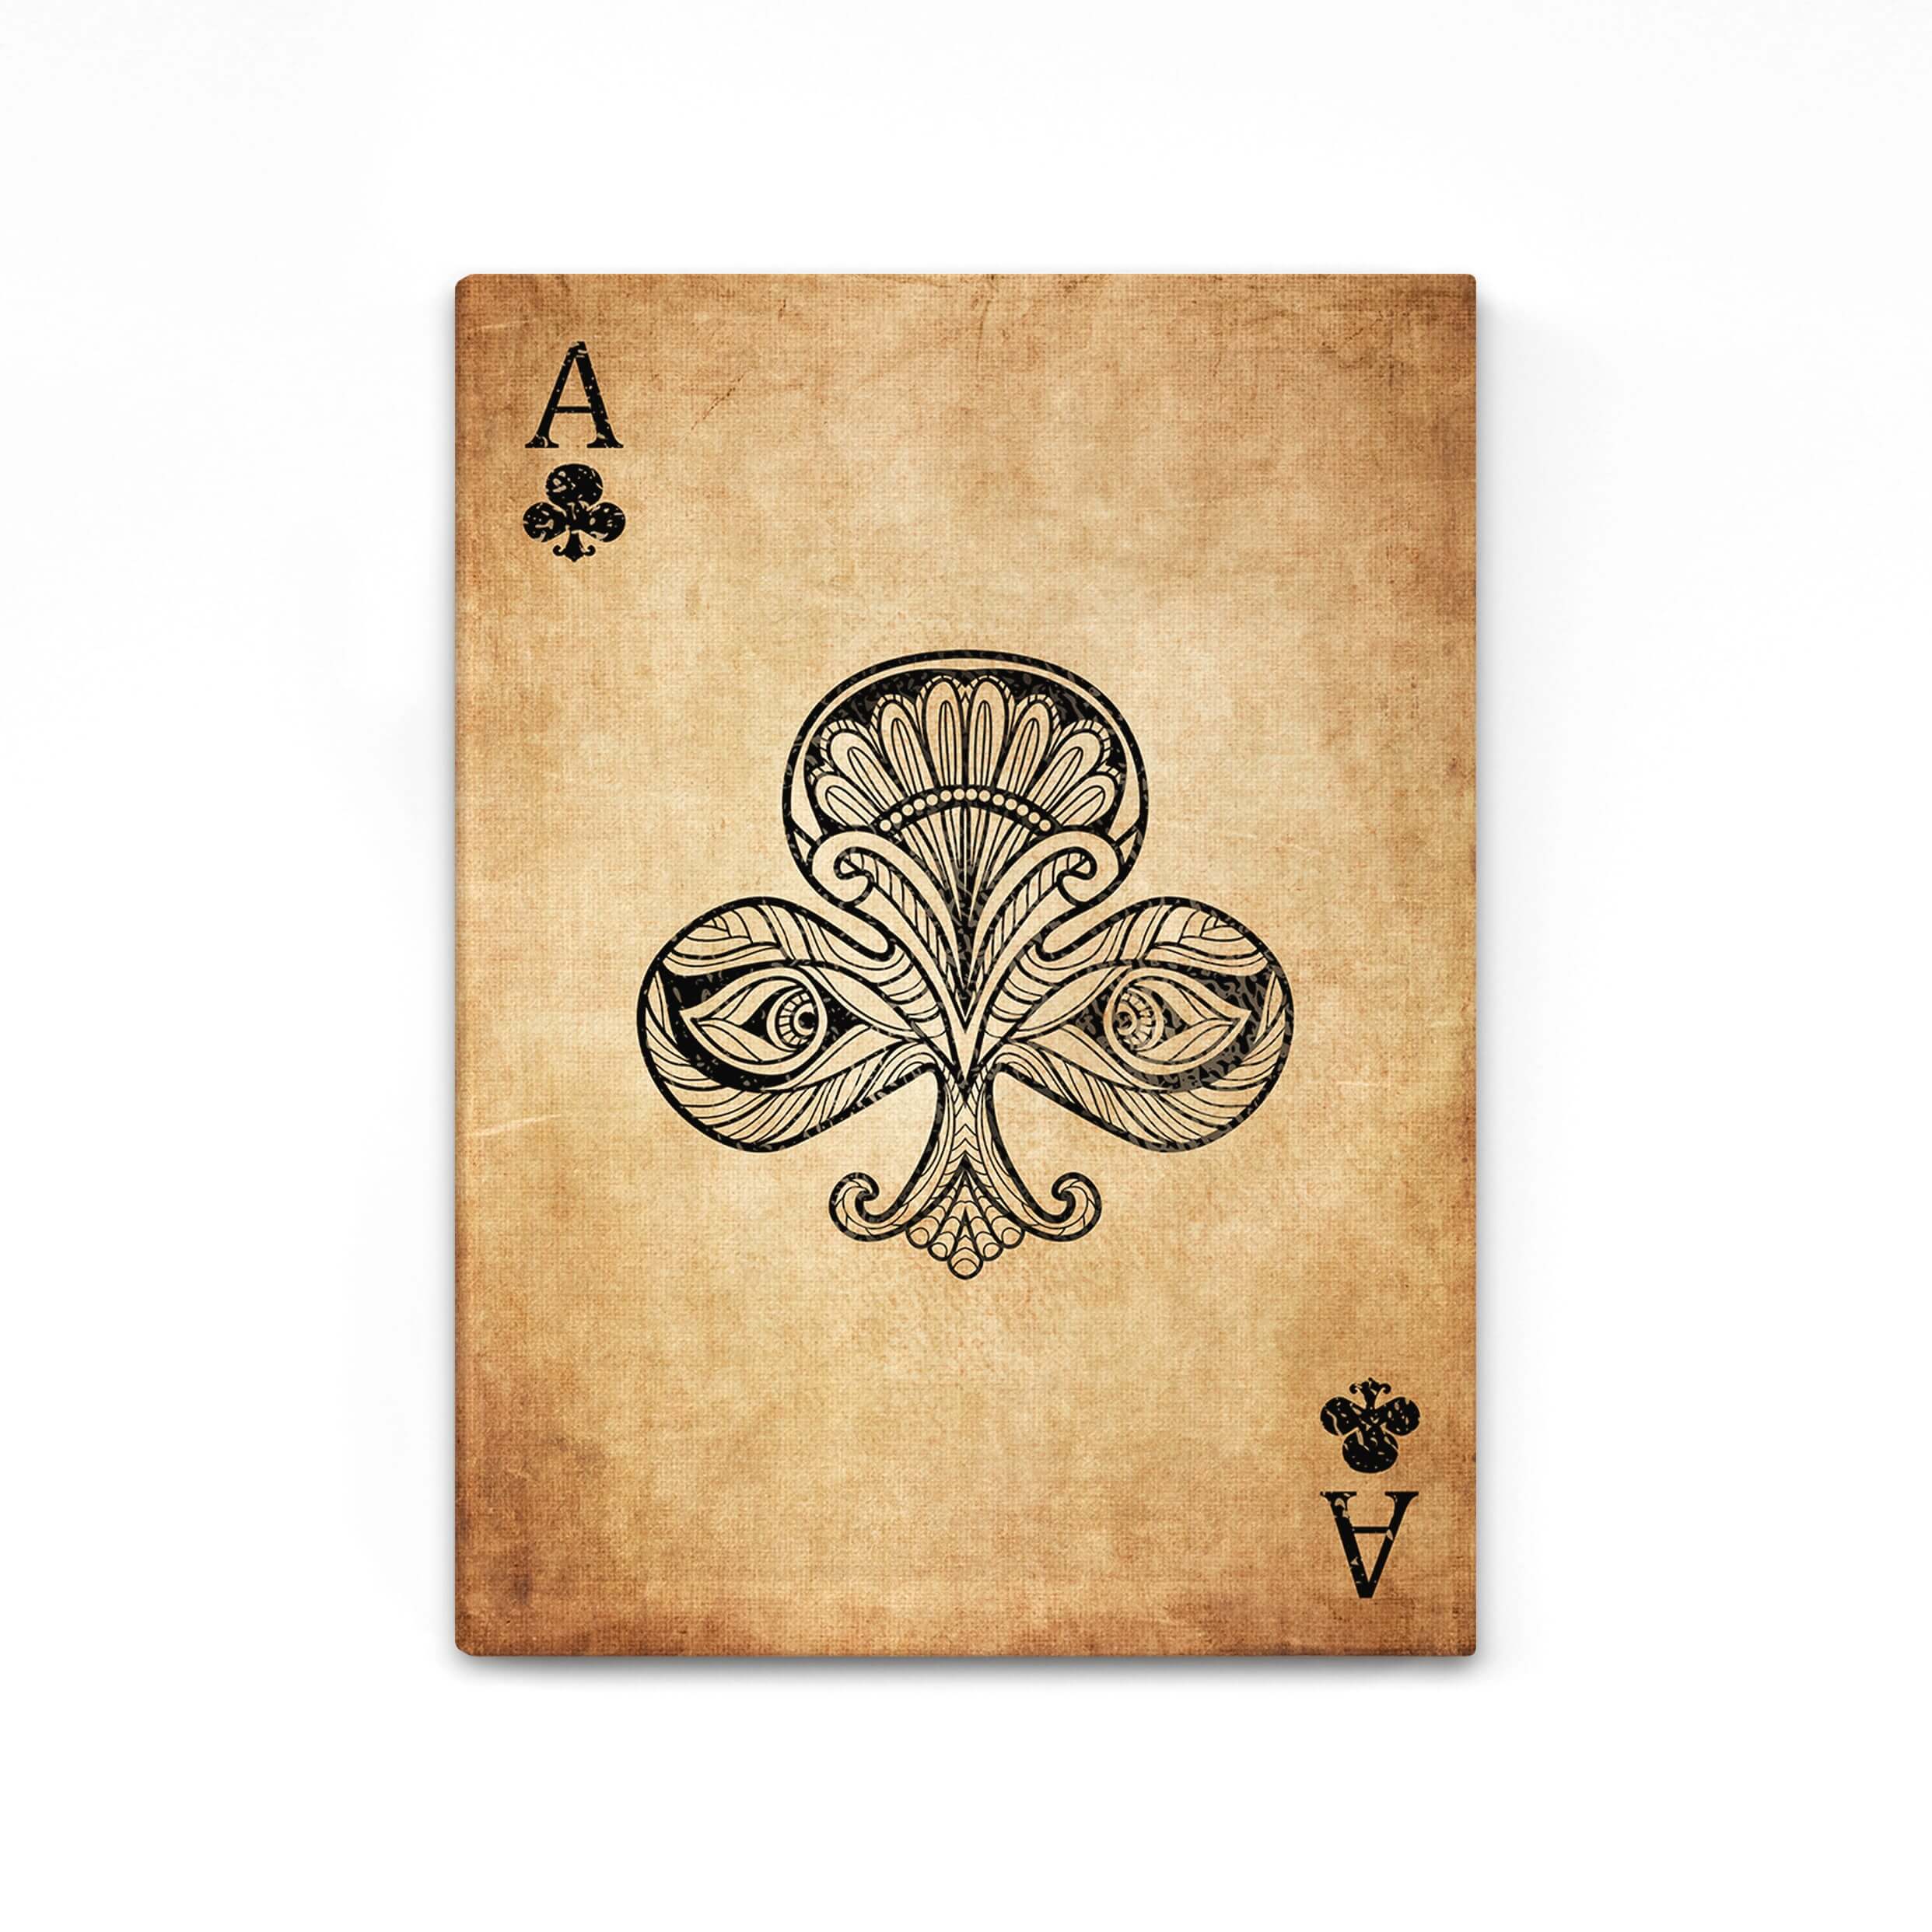 ace playing cards designs